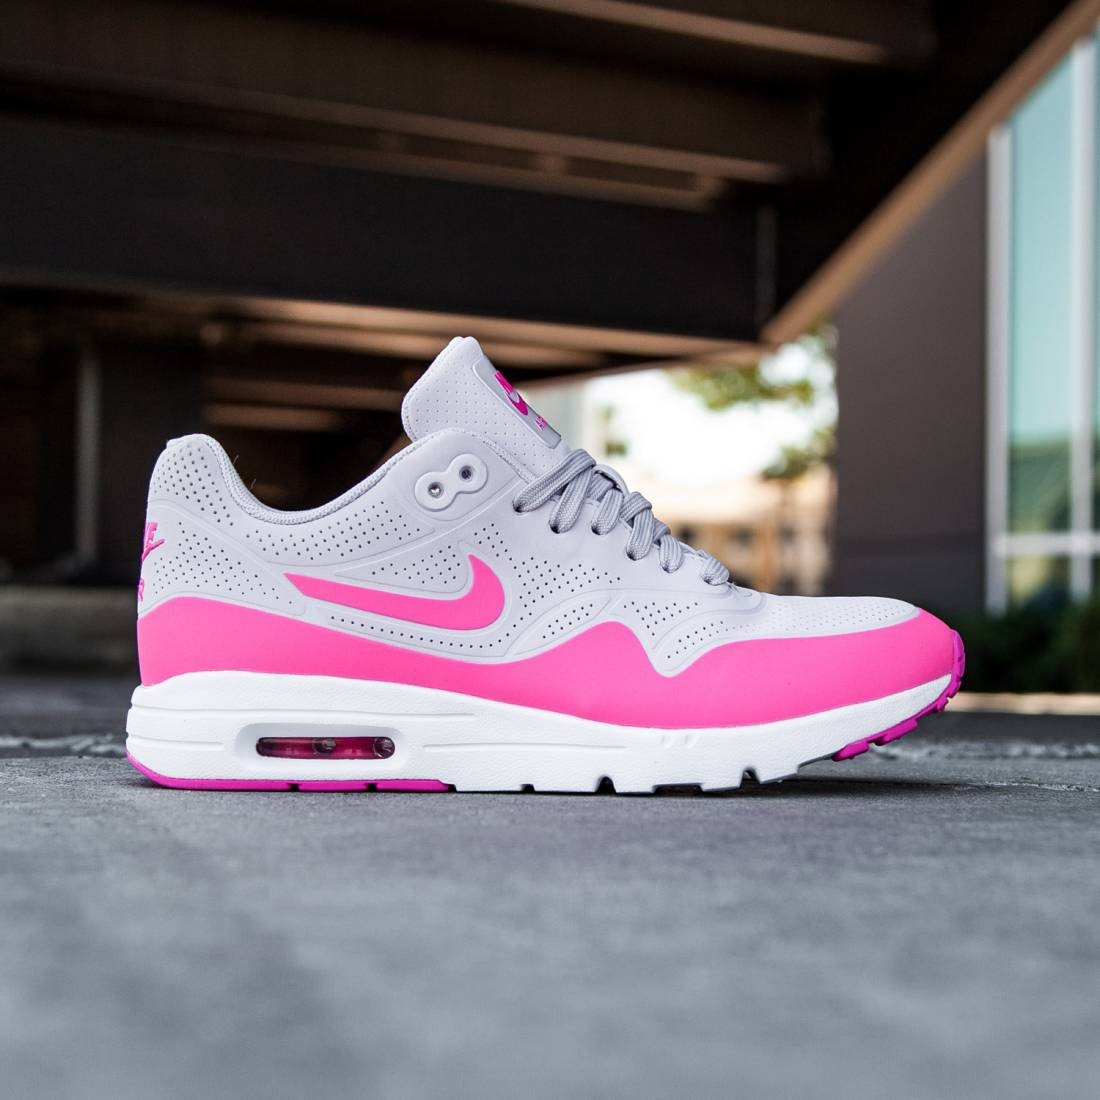 sector Schuldig toespraak Nike Women Air Max 1 Ultra Moire (bleached lilac / white / pink blast)